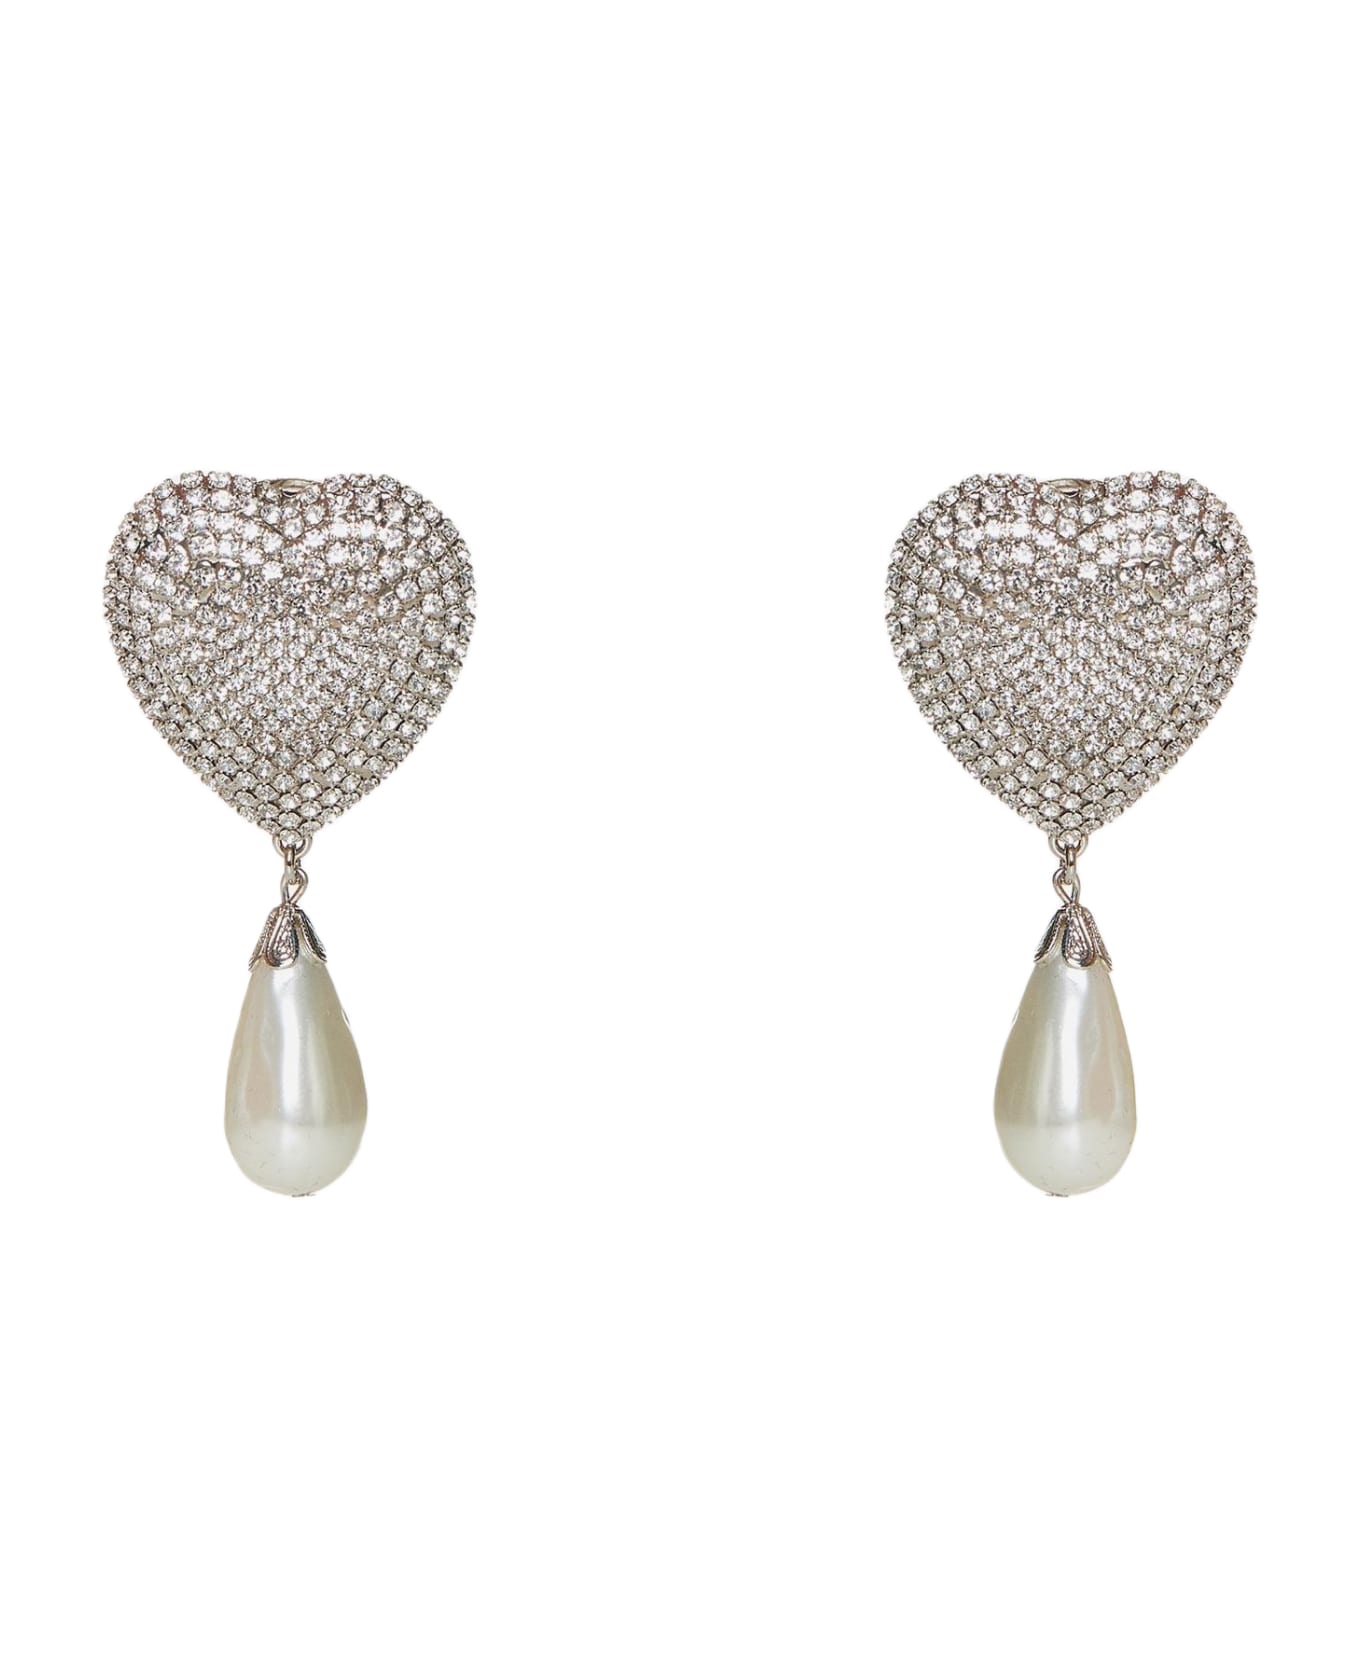 Alessandra Rich Heart Crystals And Pearl Earrings - Cry Silver